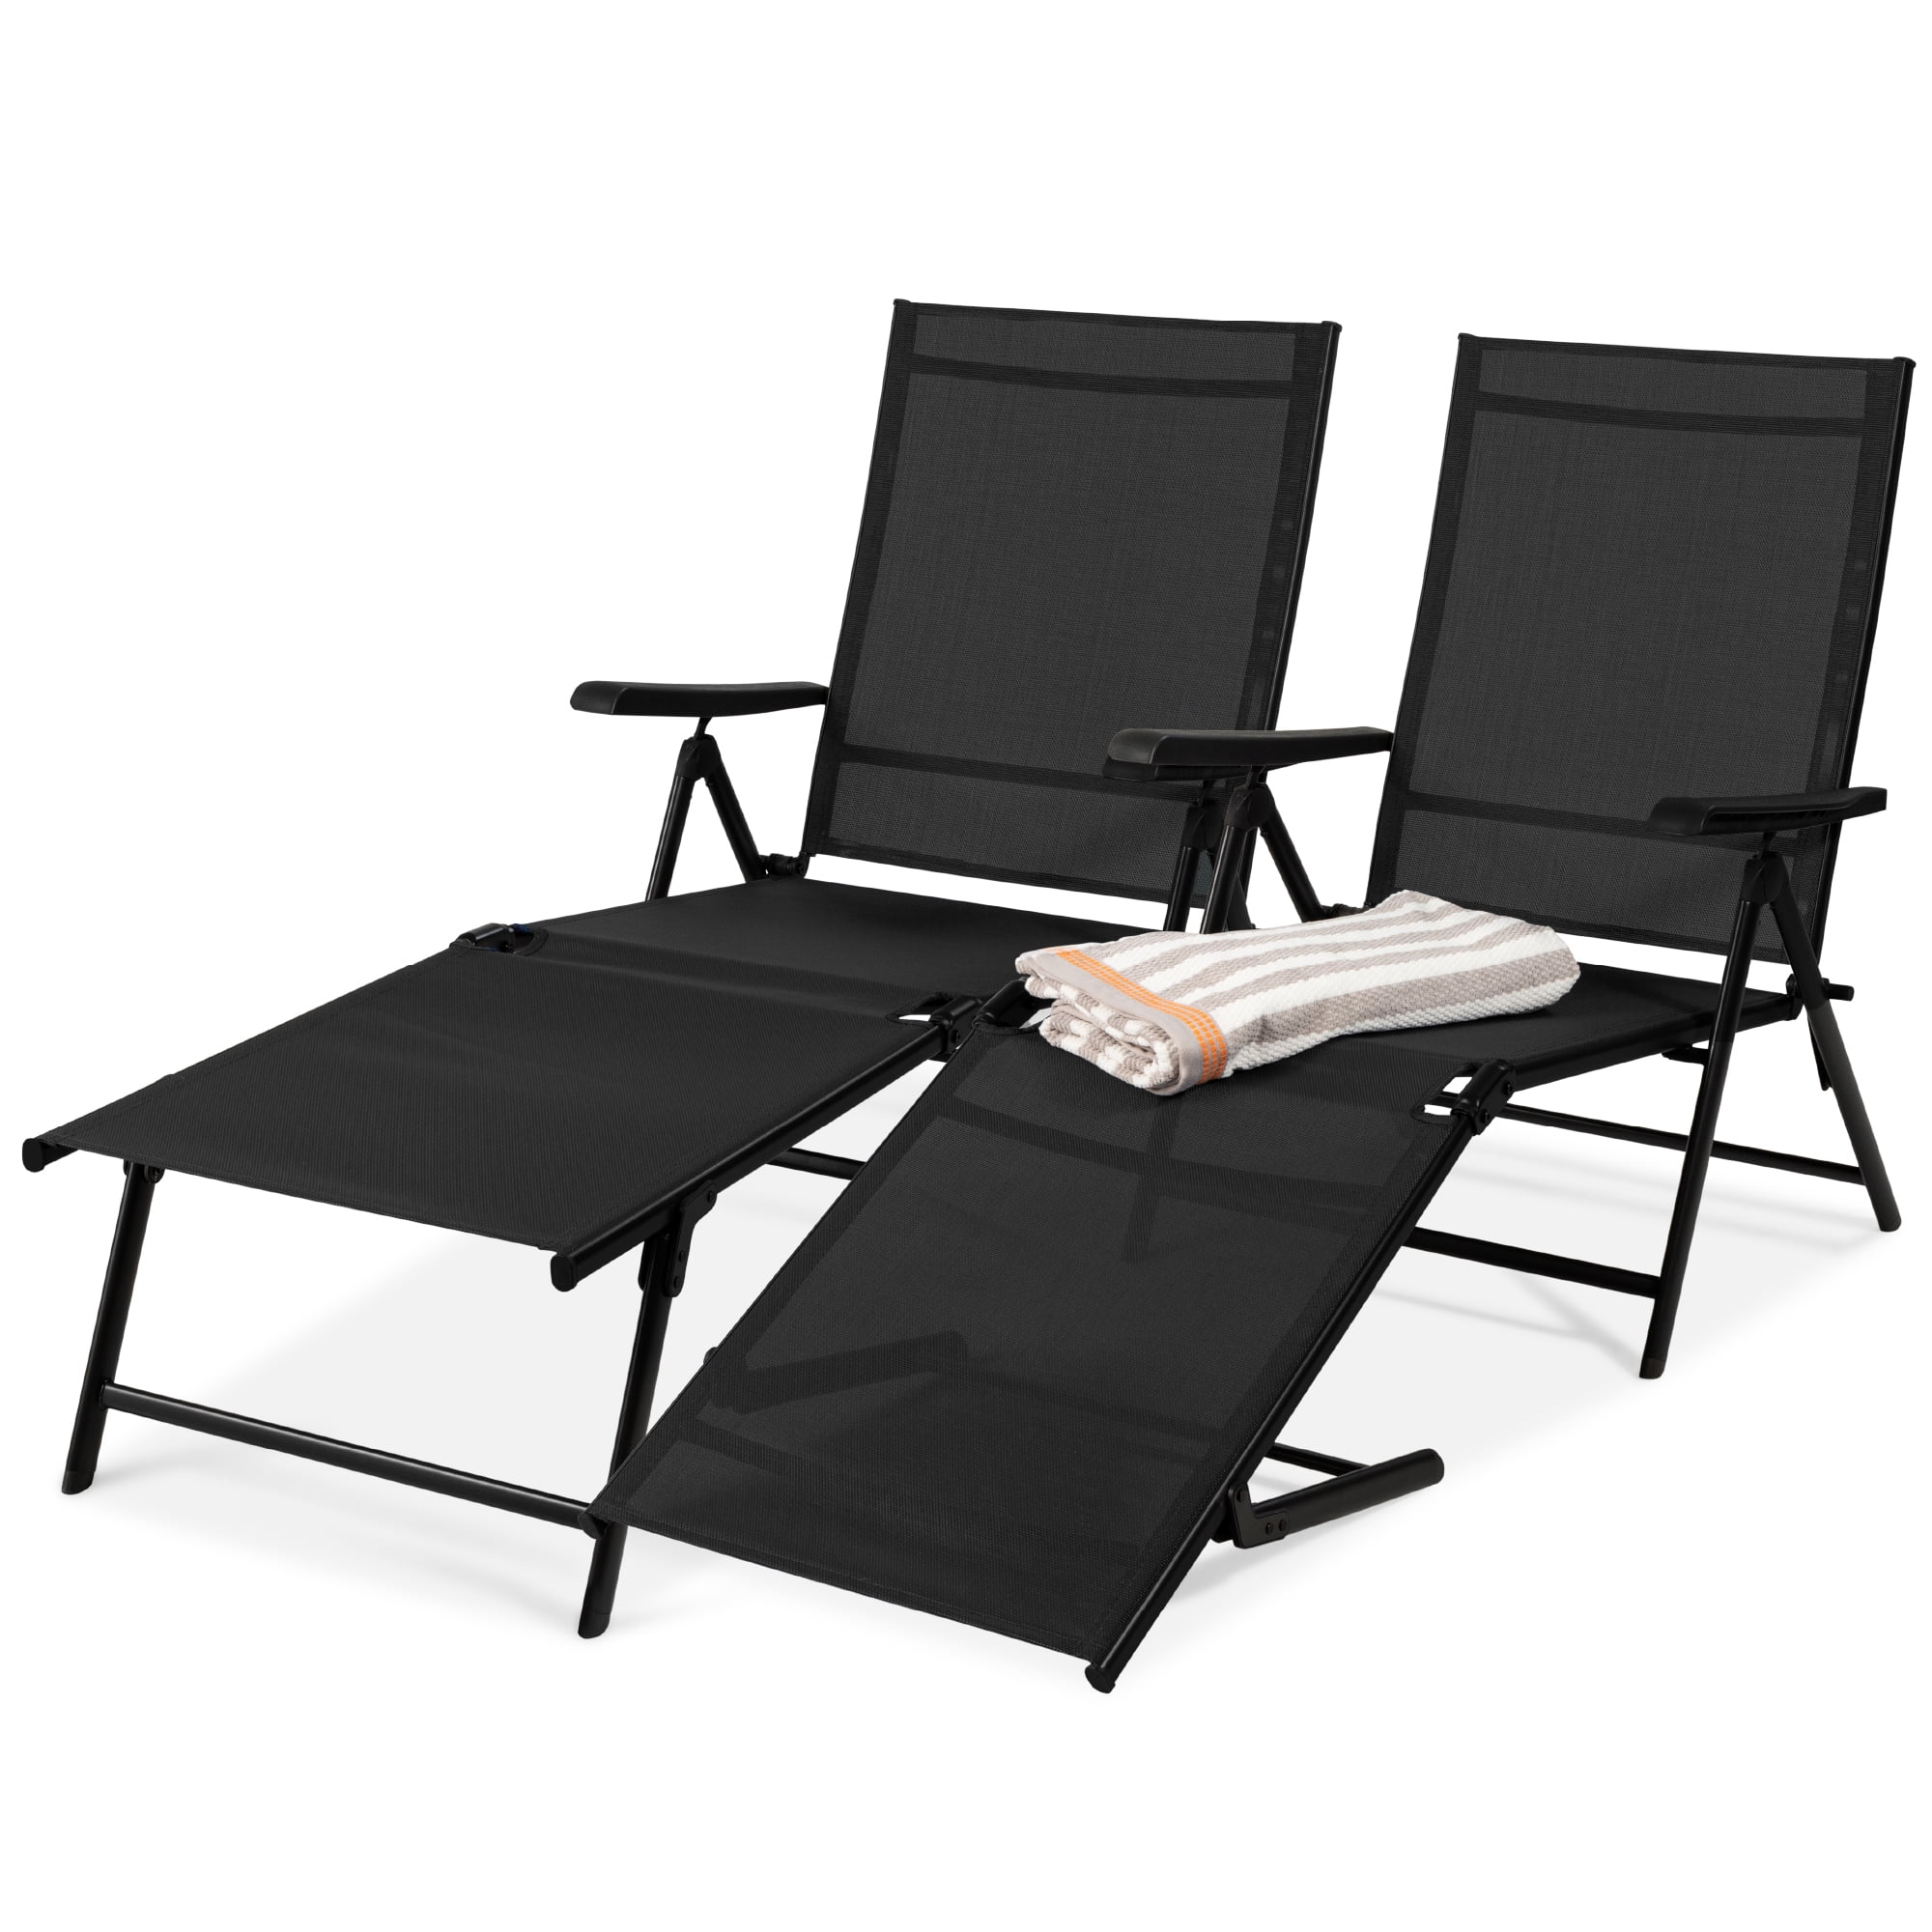 Best Choice Products Set of 2 Outdoor Patio Chaise Lounge Chair Adjustable Folding Pool Lounger w/ Steel Frame - Black